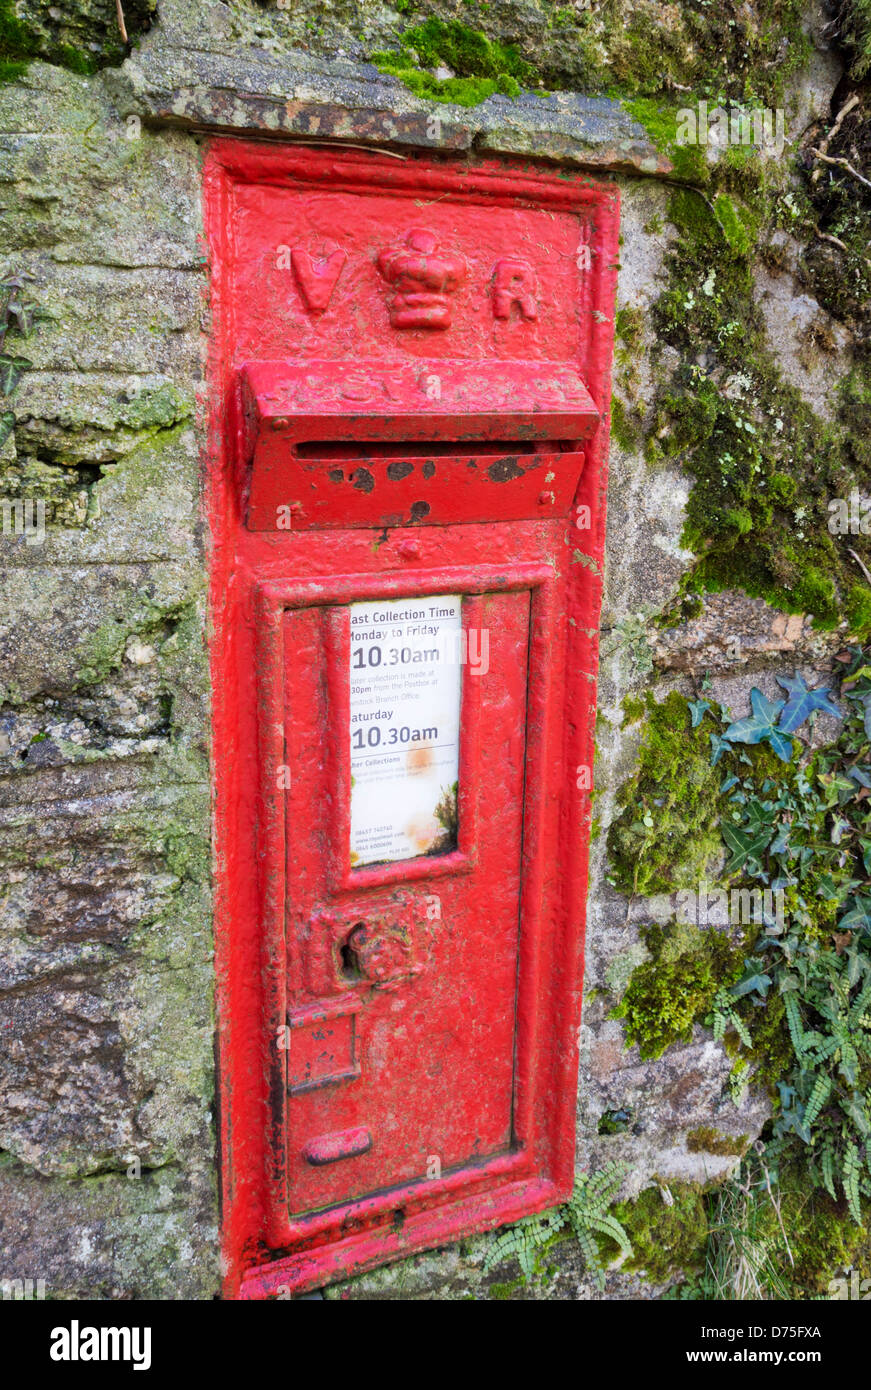 Country postbox dating from reign of Queen Victoria, Devon, UK Stock Photo